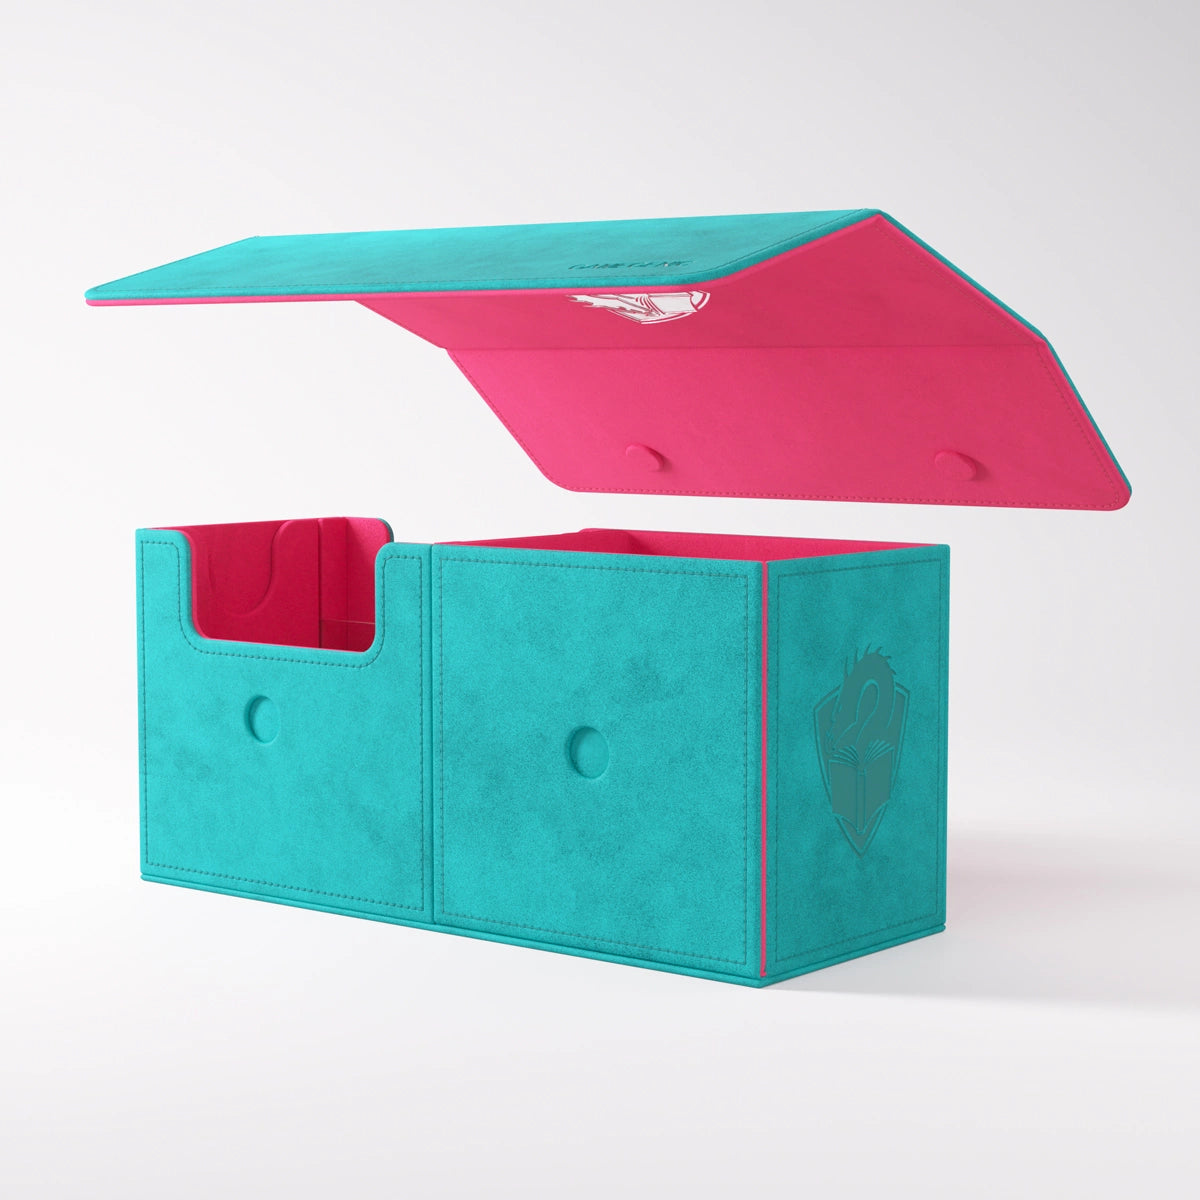 Gamegenic - Deck Box - The Academic - XL Pink/Teal (133+)